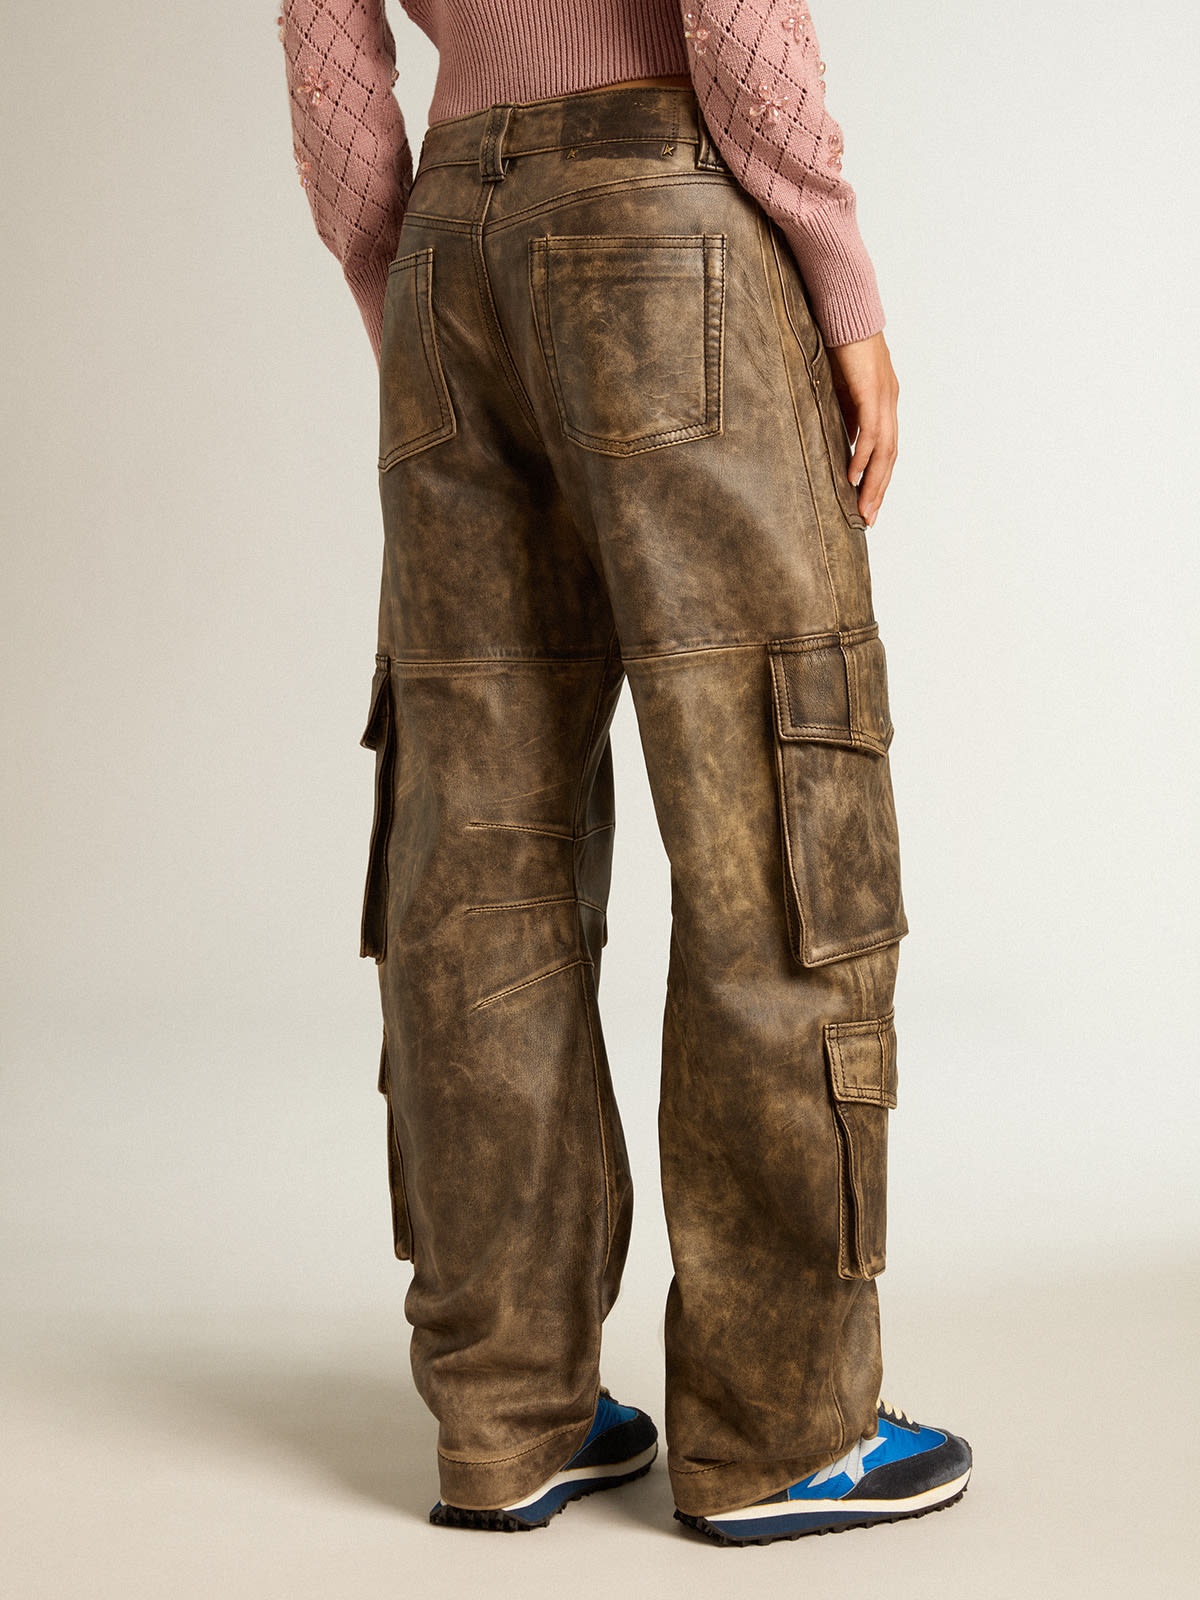 Women's aged brown nappa leather cargo pants - 4